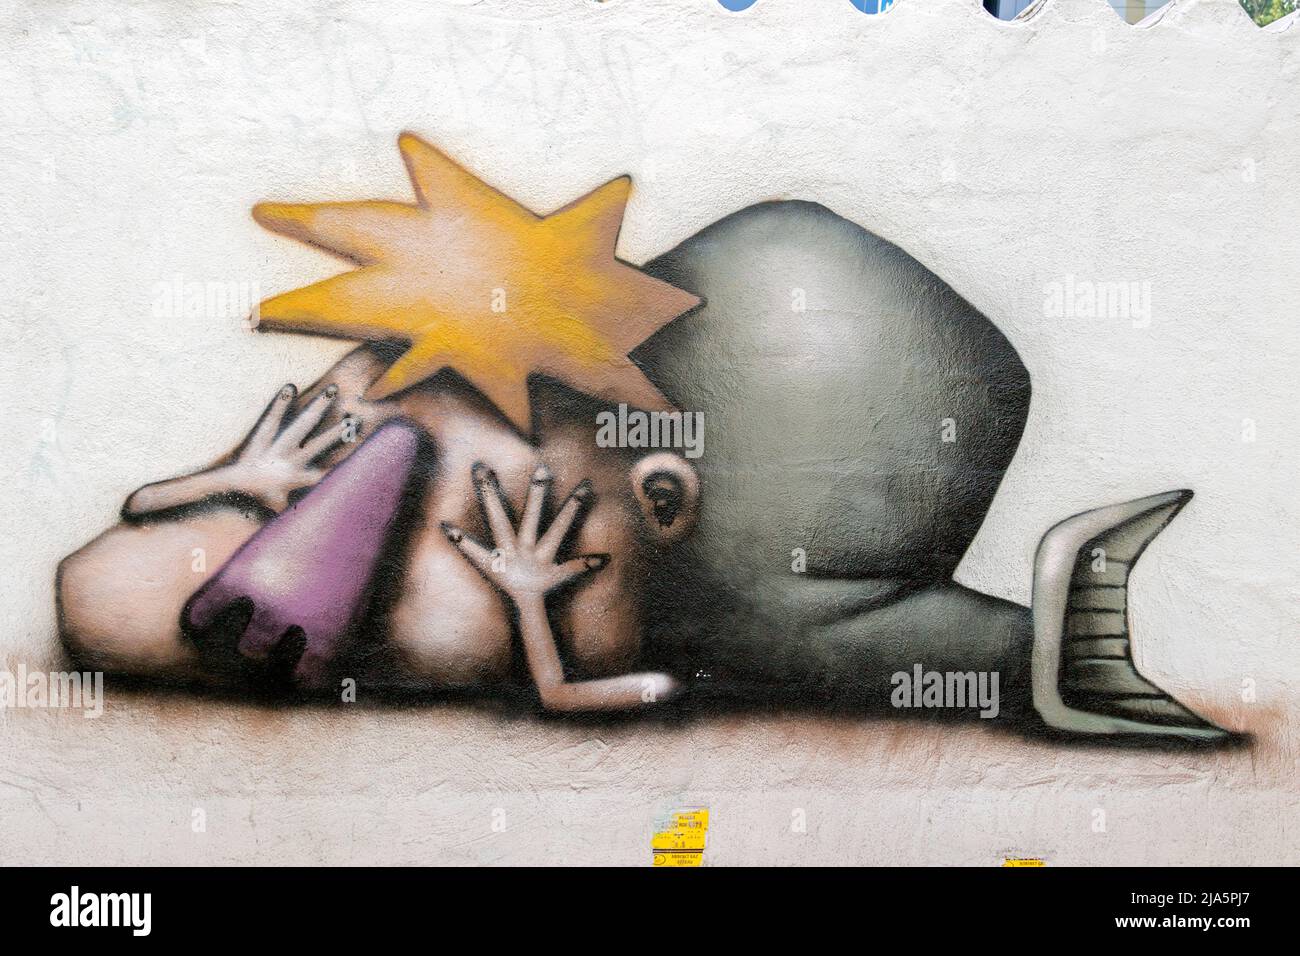 Graffiti by L empreinte jo v on a wall in support of Ukraine being invaded by the Russian army in Montpellier. Occitanie, France Stock Photo